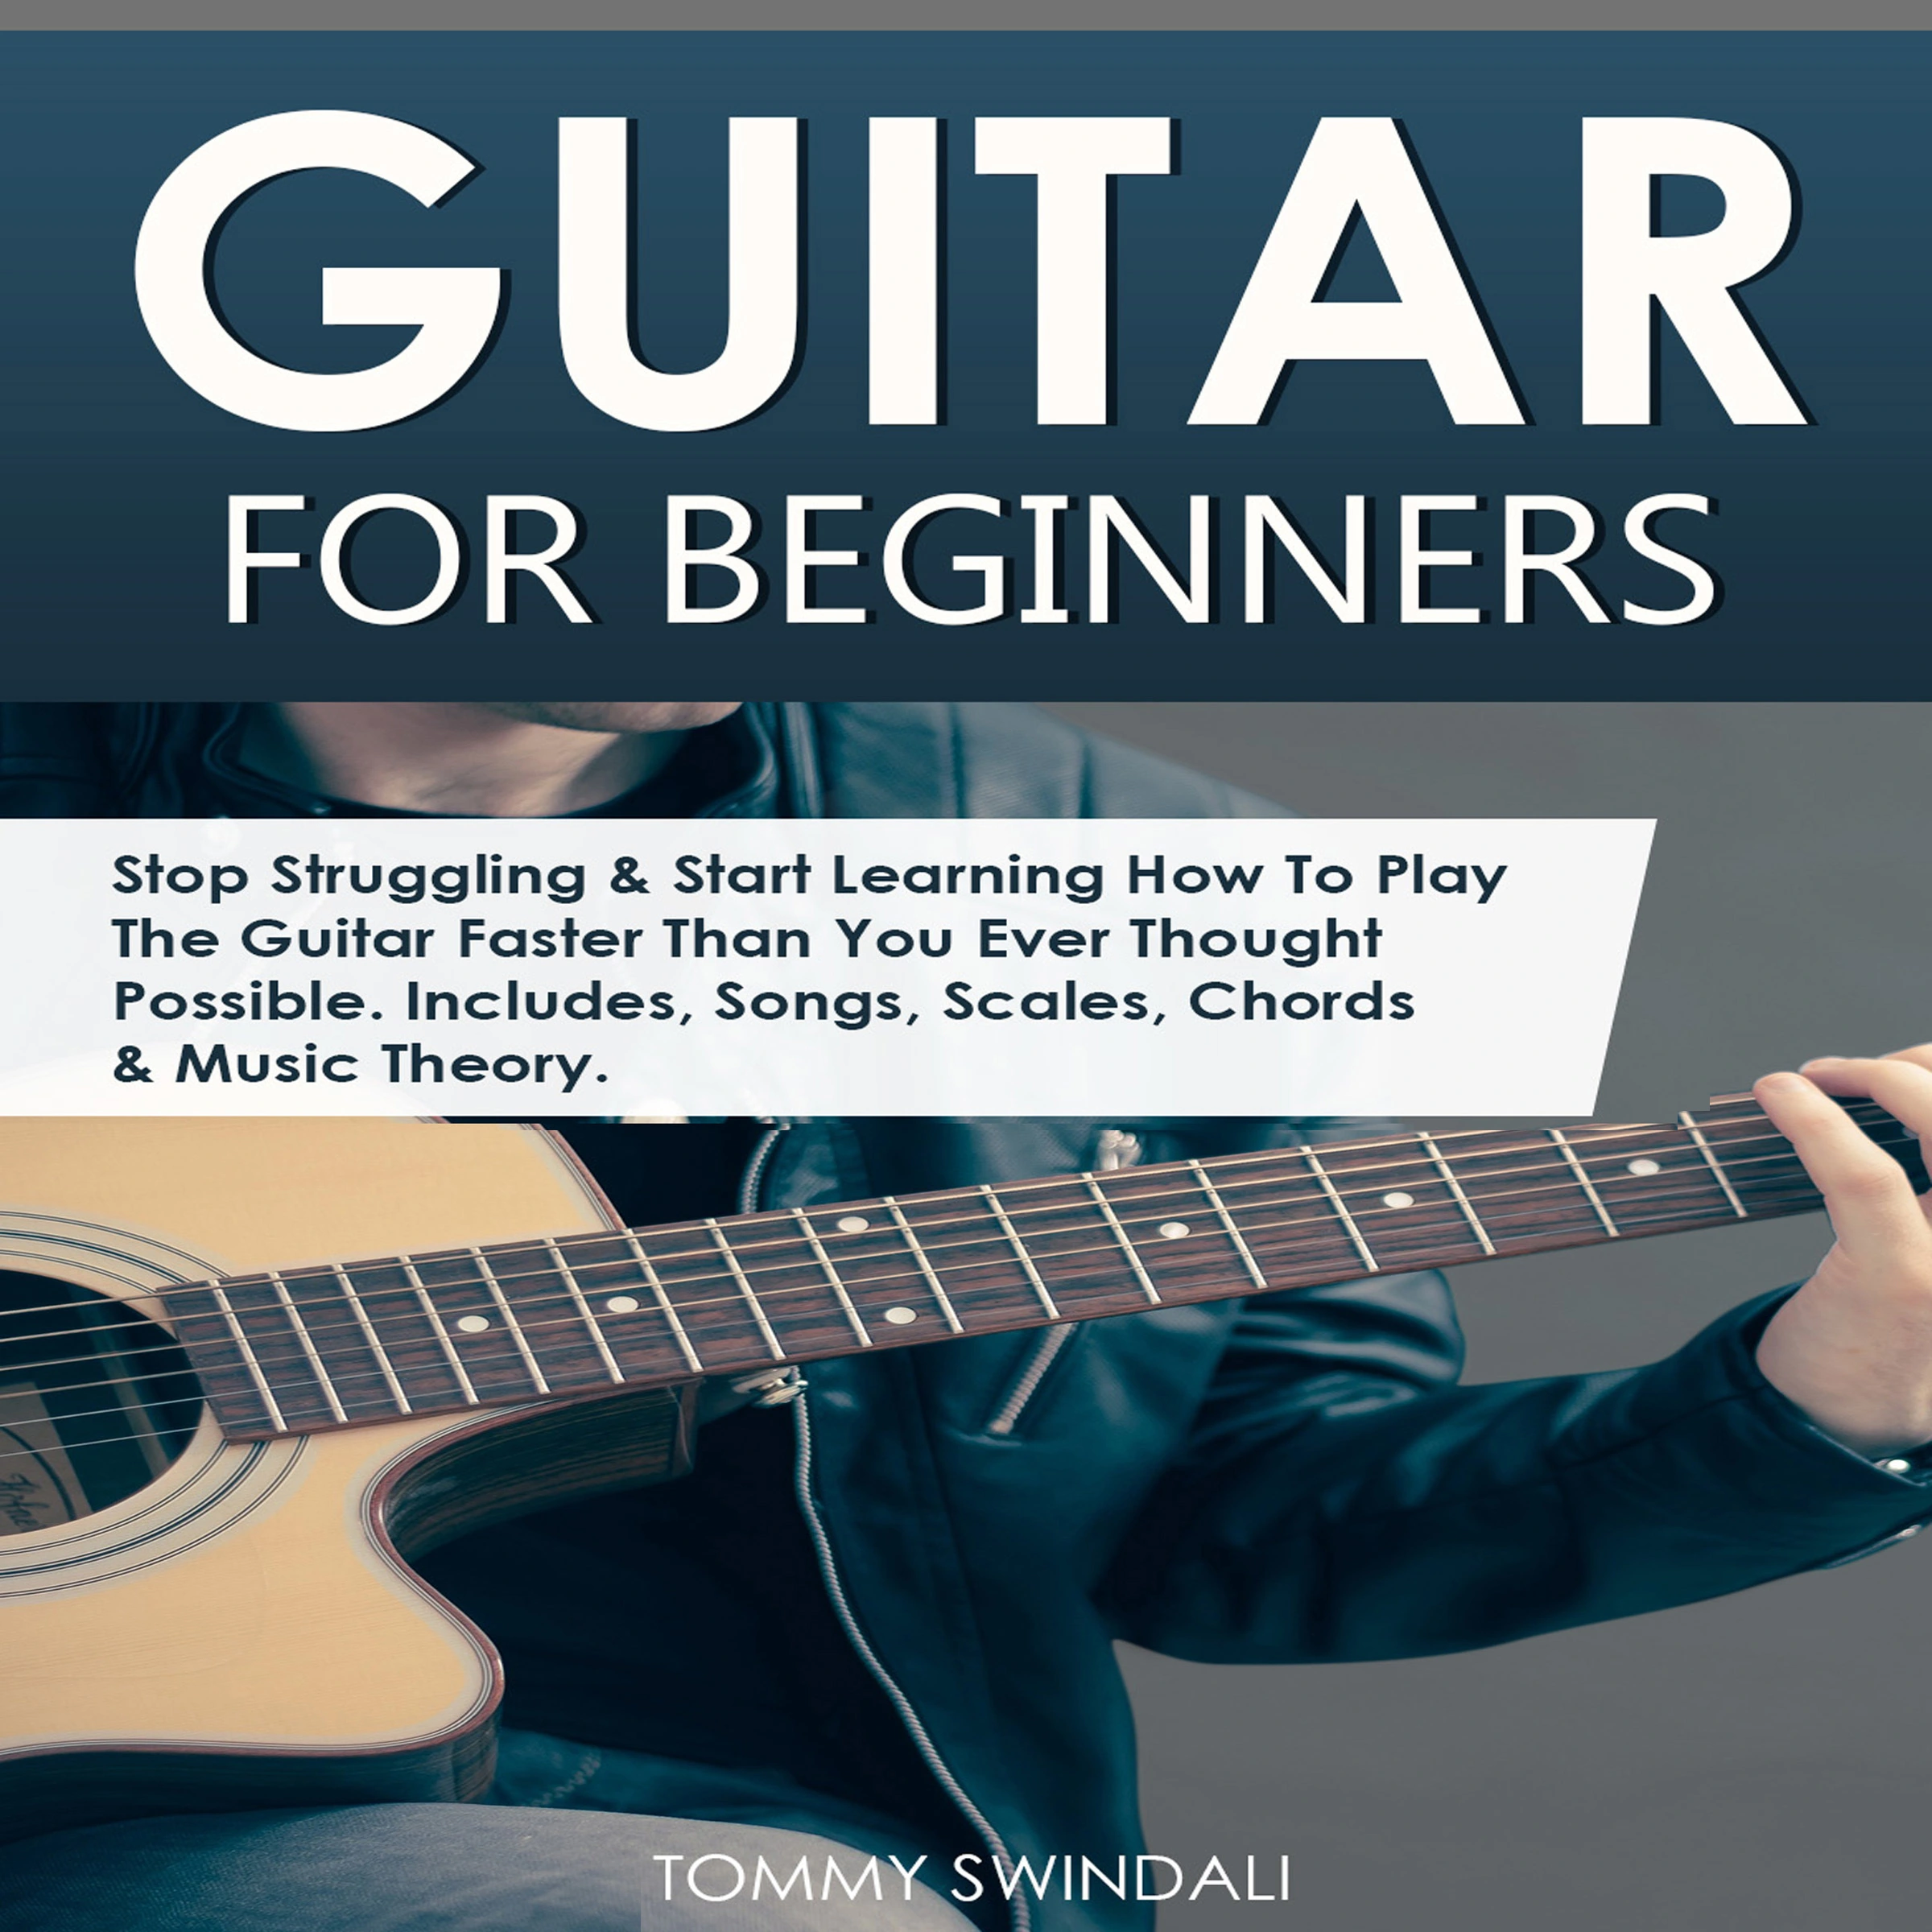 Guitar for Beginners Audiobook by Tommy Swindali